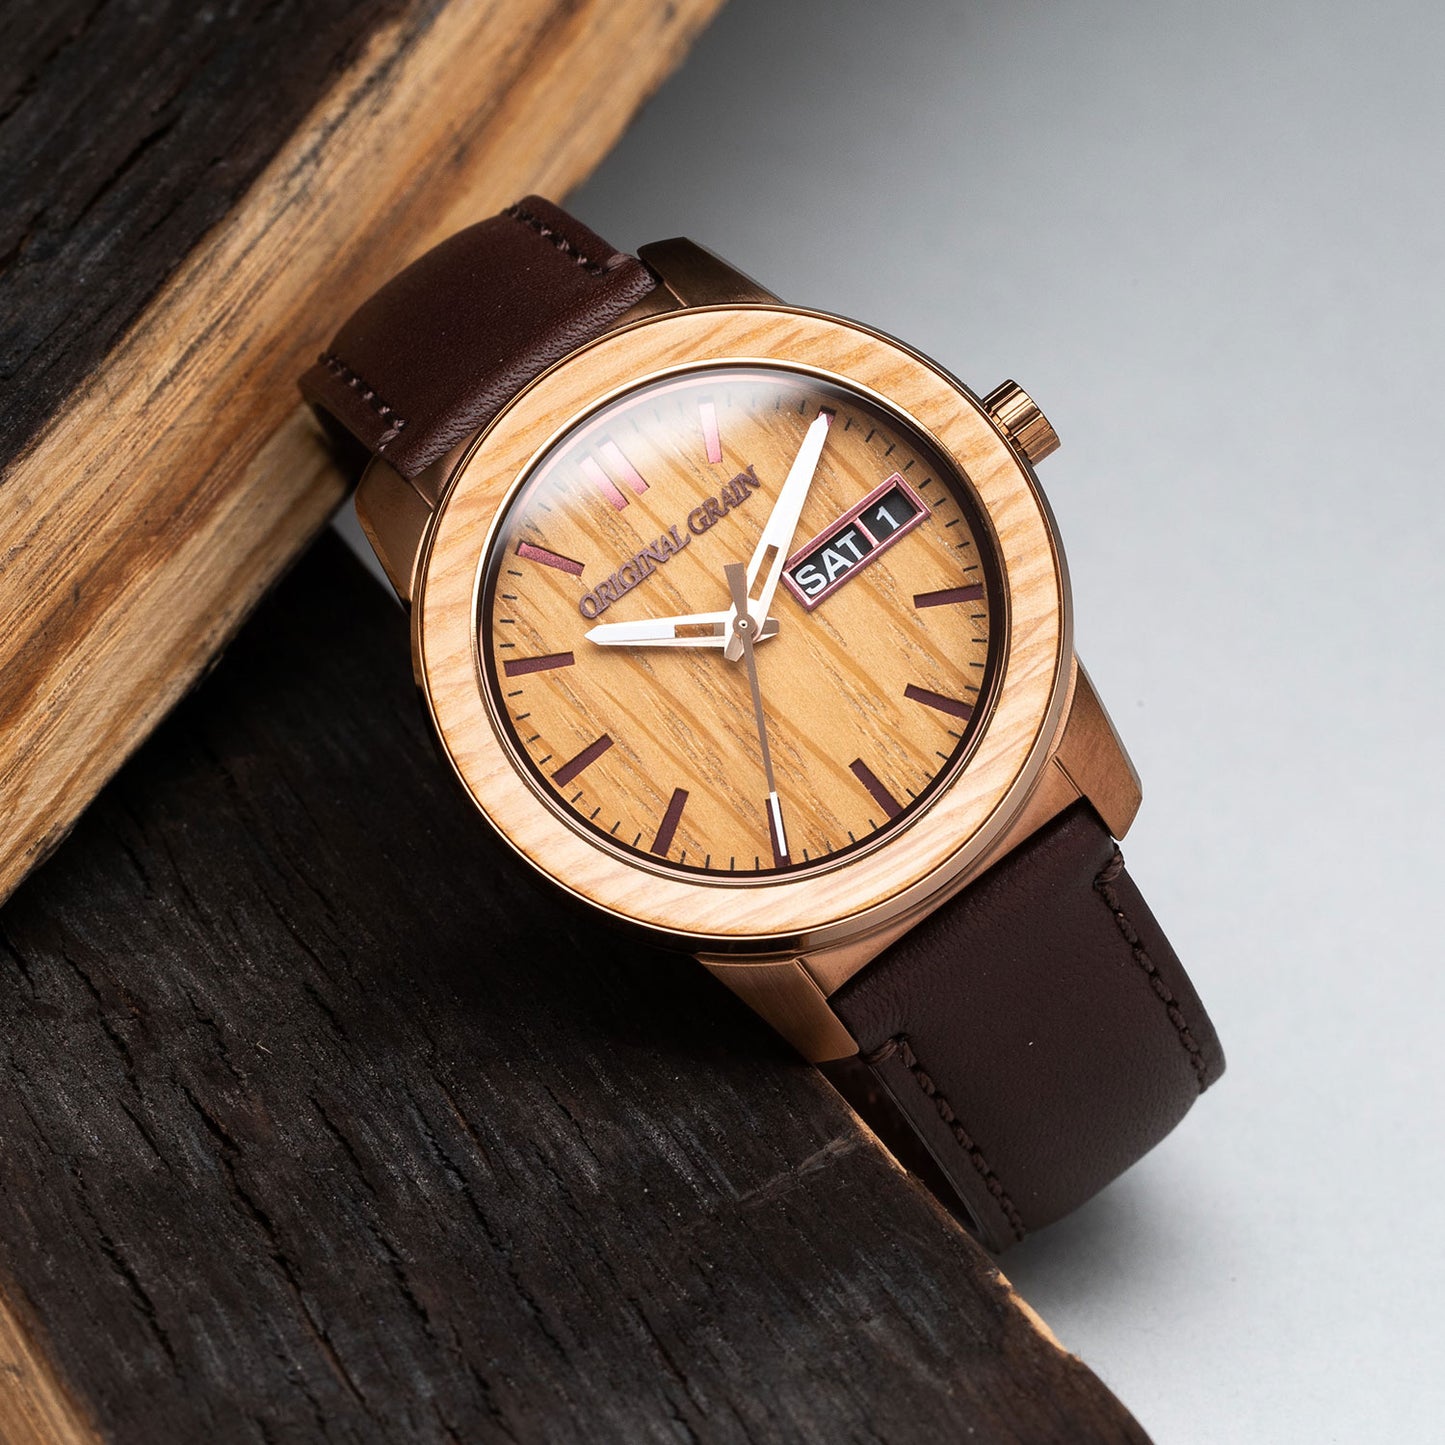 Whiskey Espresso Leather Barrel 42mm front of watch with brown leather strap by Original Grain